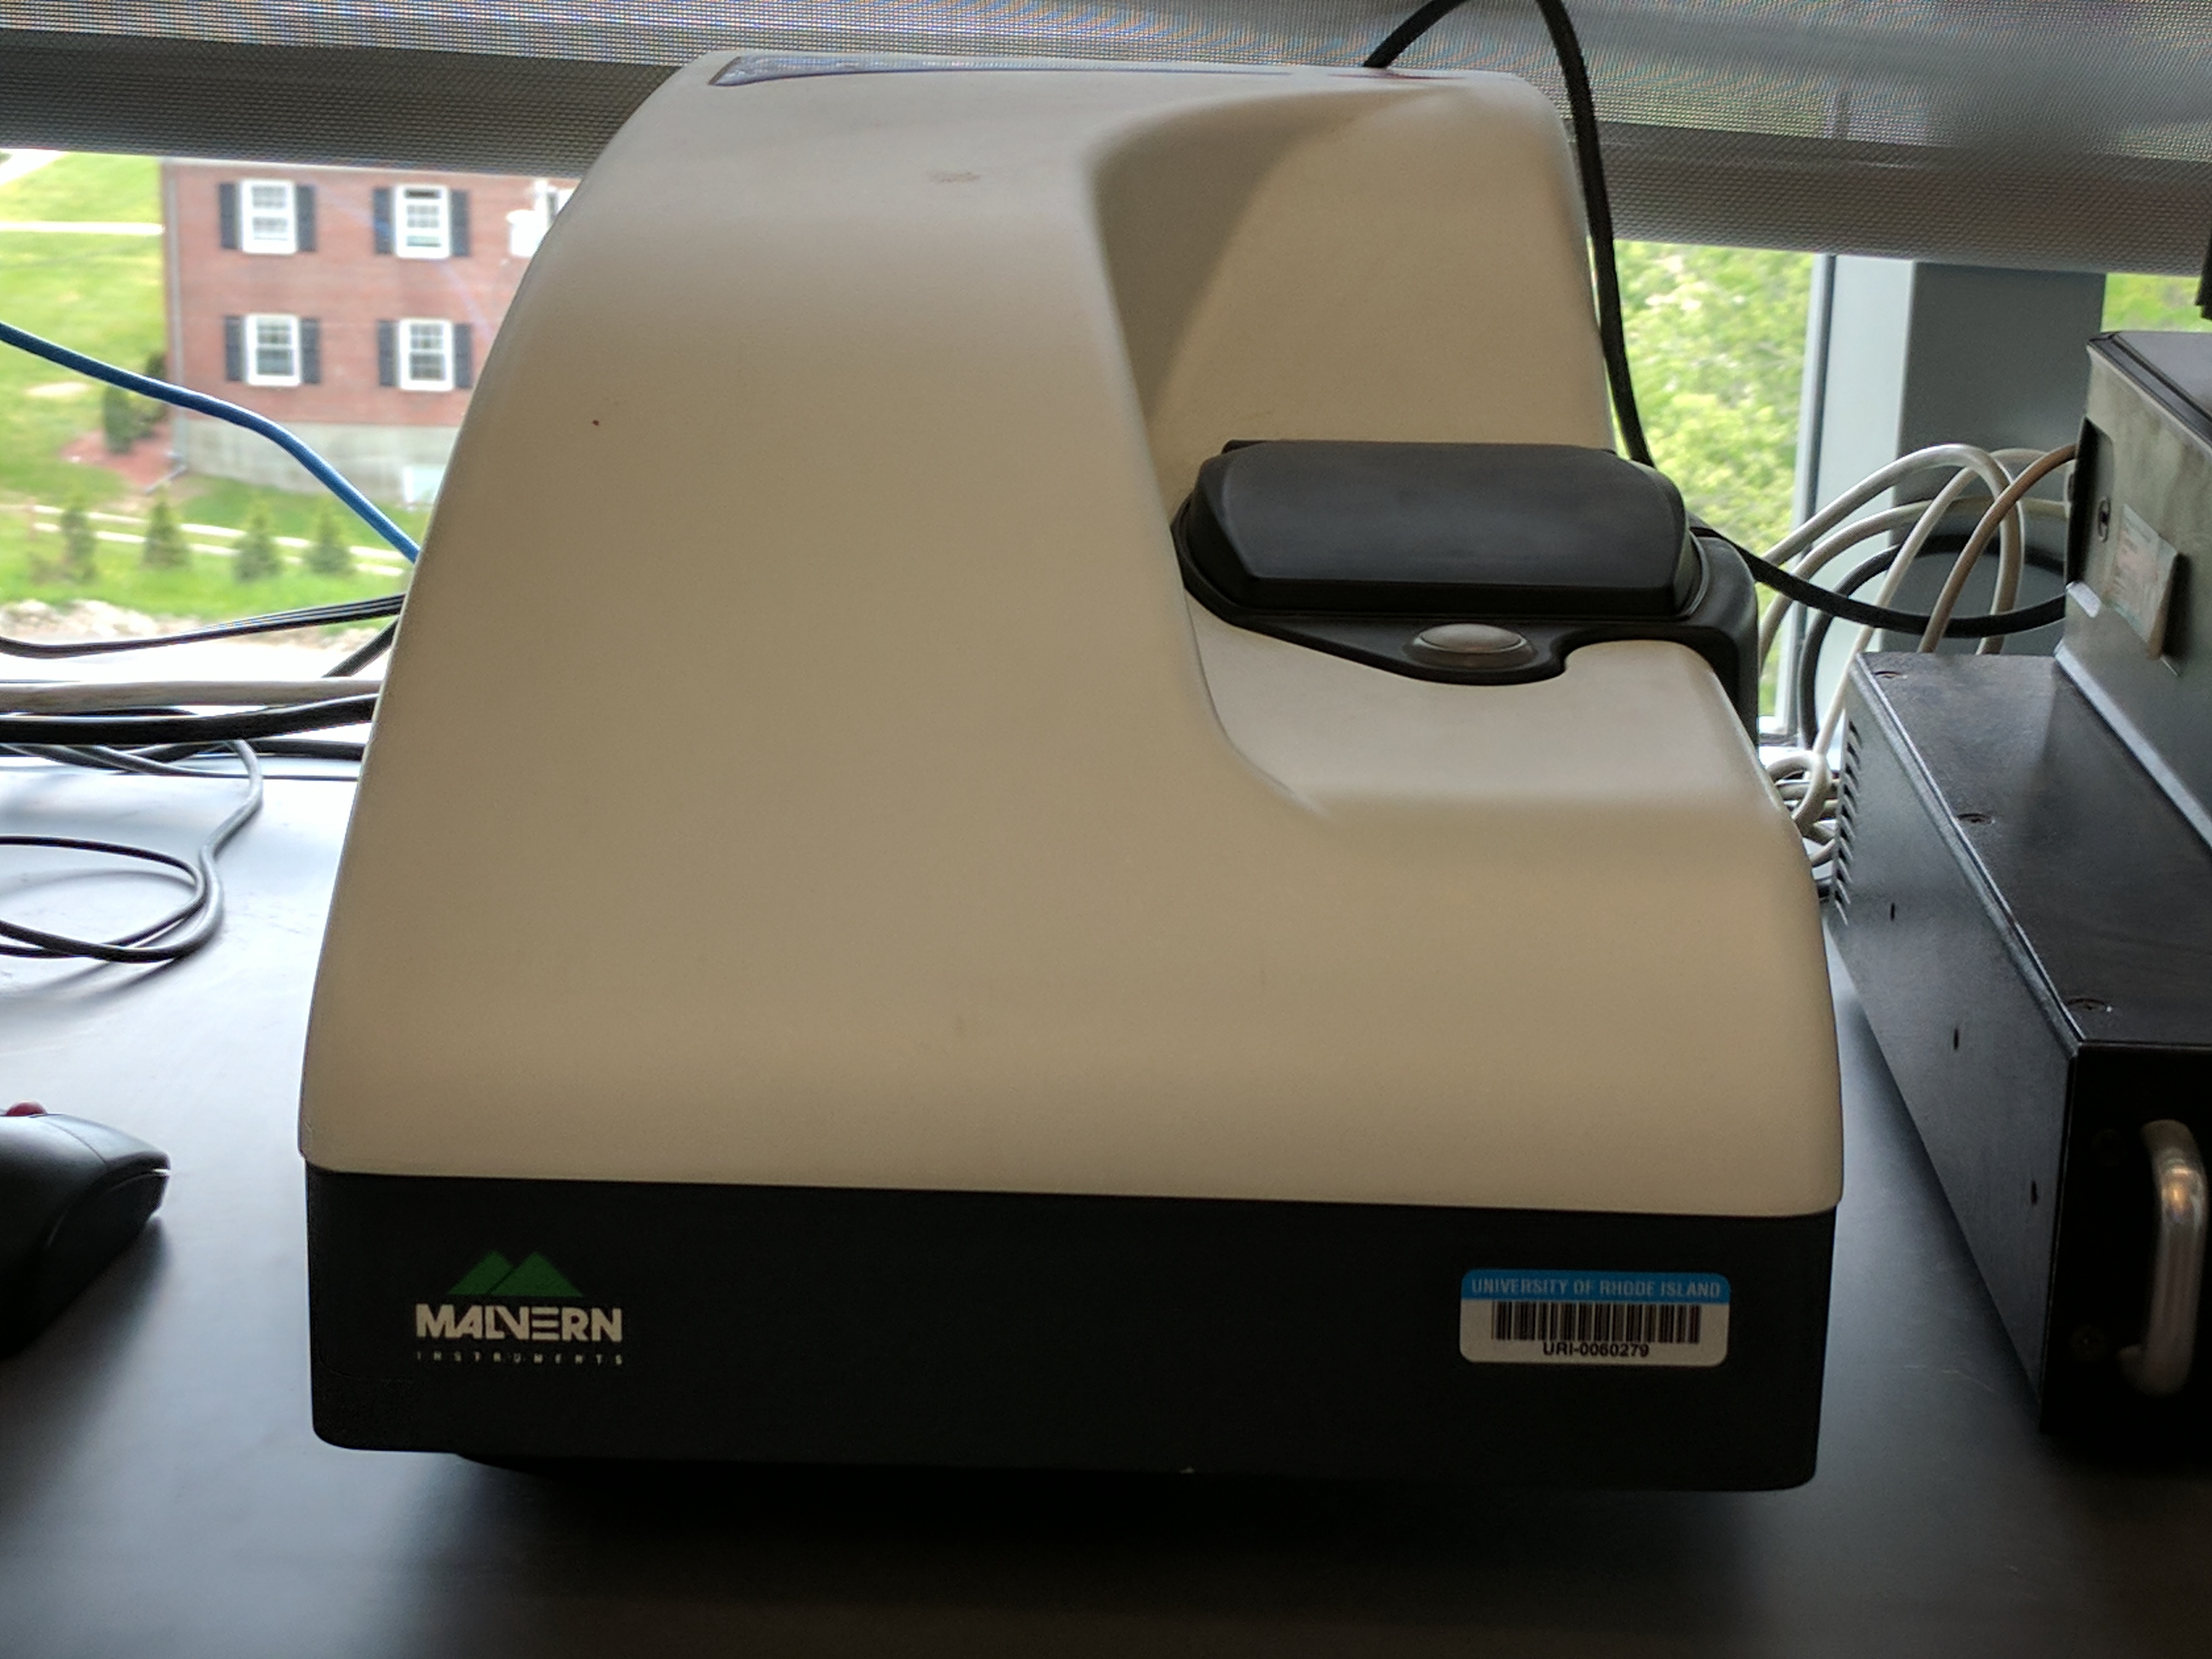 Malvern Zeta Sizer: This instrument uses light scattering to measure the zeta potential and size distribution of nanoparticles in solution.